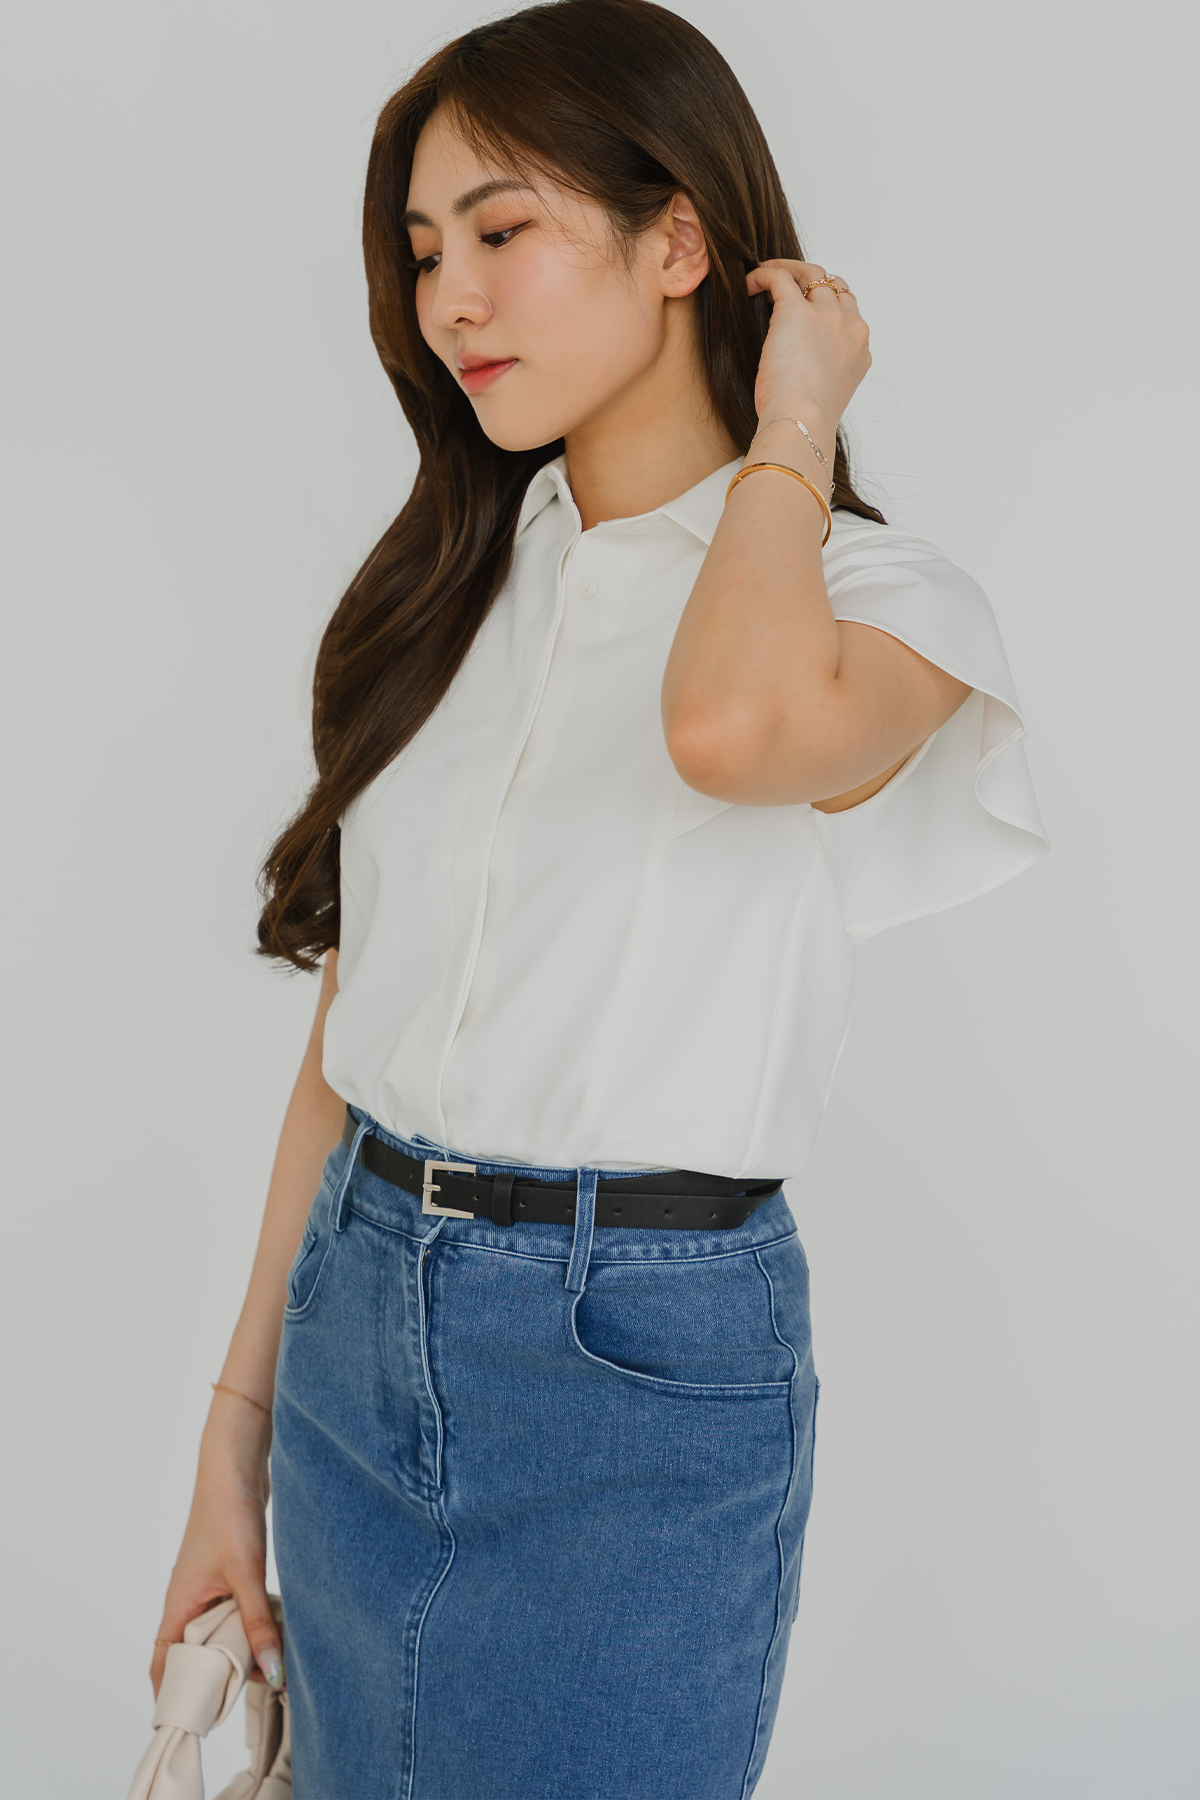 The One Flutter Sleeve Top (White)